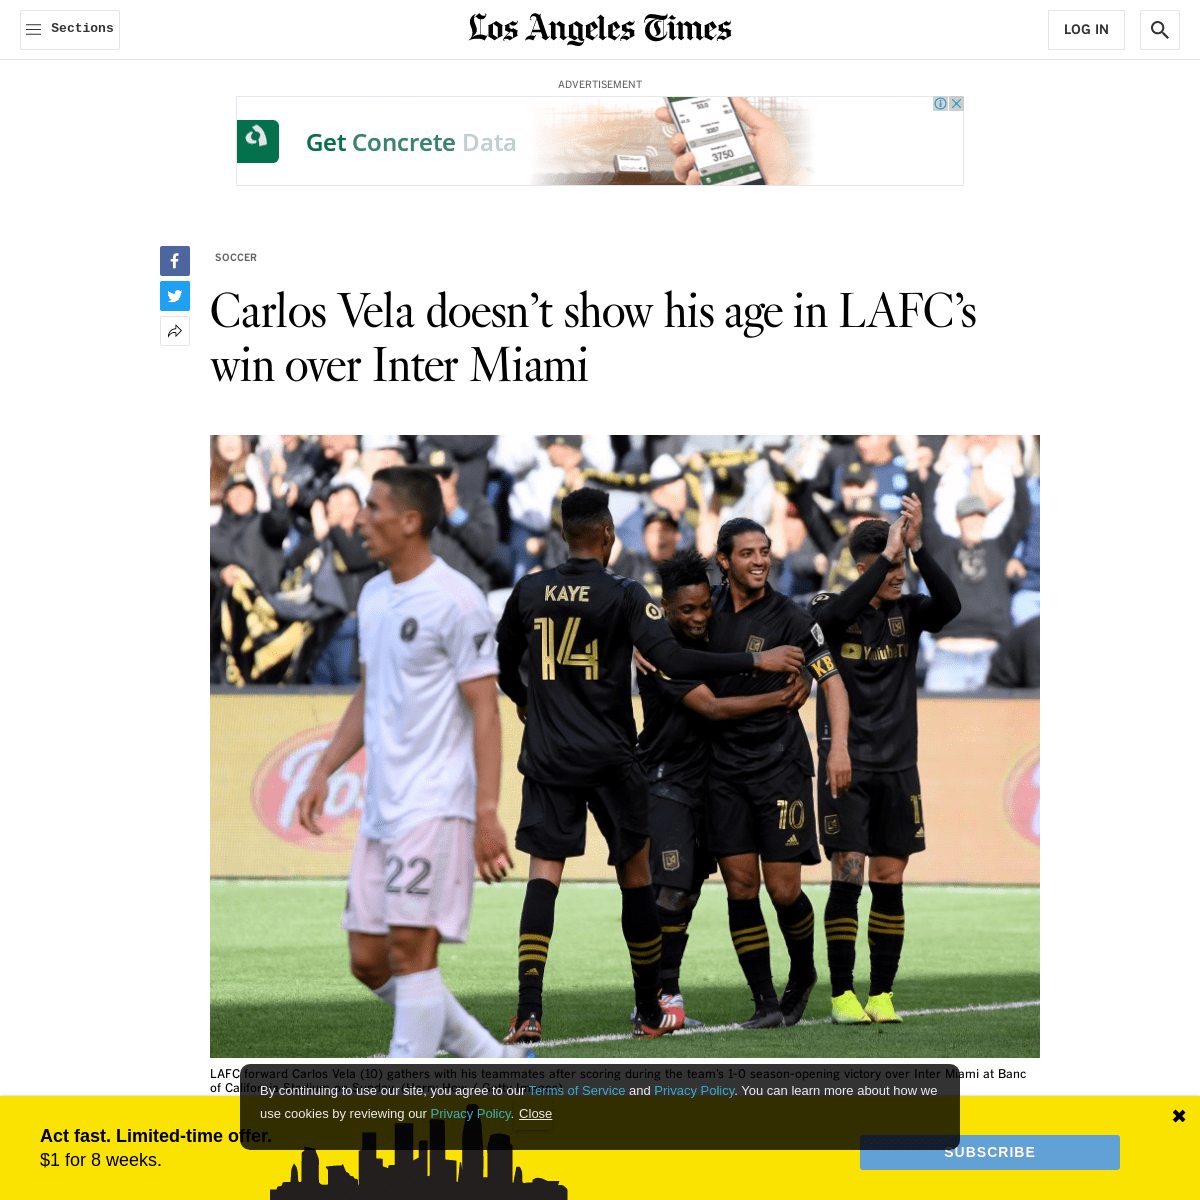 A complete backup of www.latimes.com/sports/soccer/story/2020-03-01/carlos-vela-picks-up-where-he-left-off-in-lafcs-win-over-int